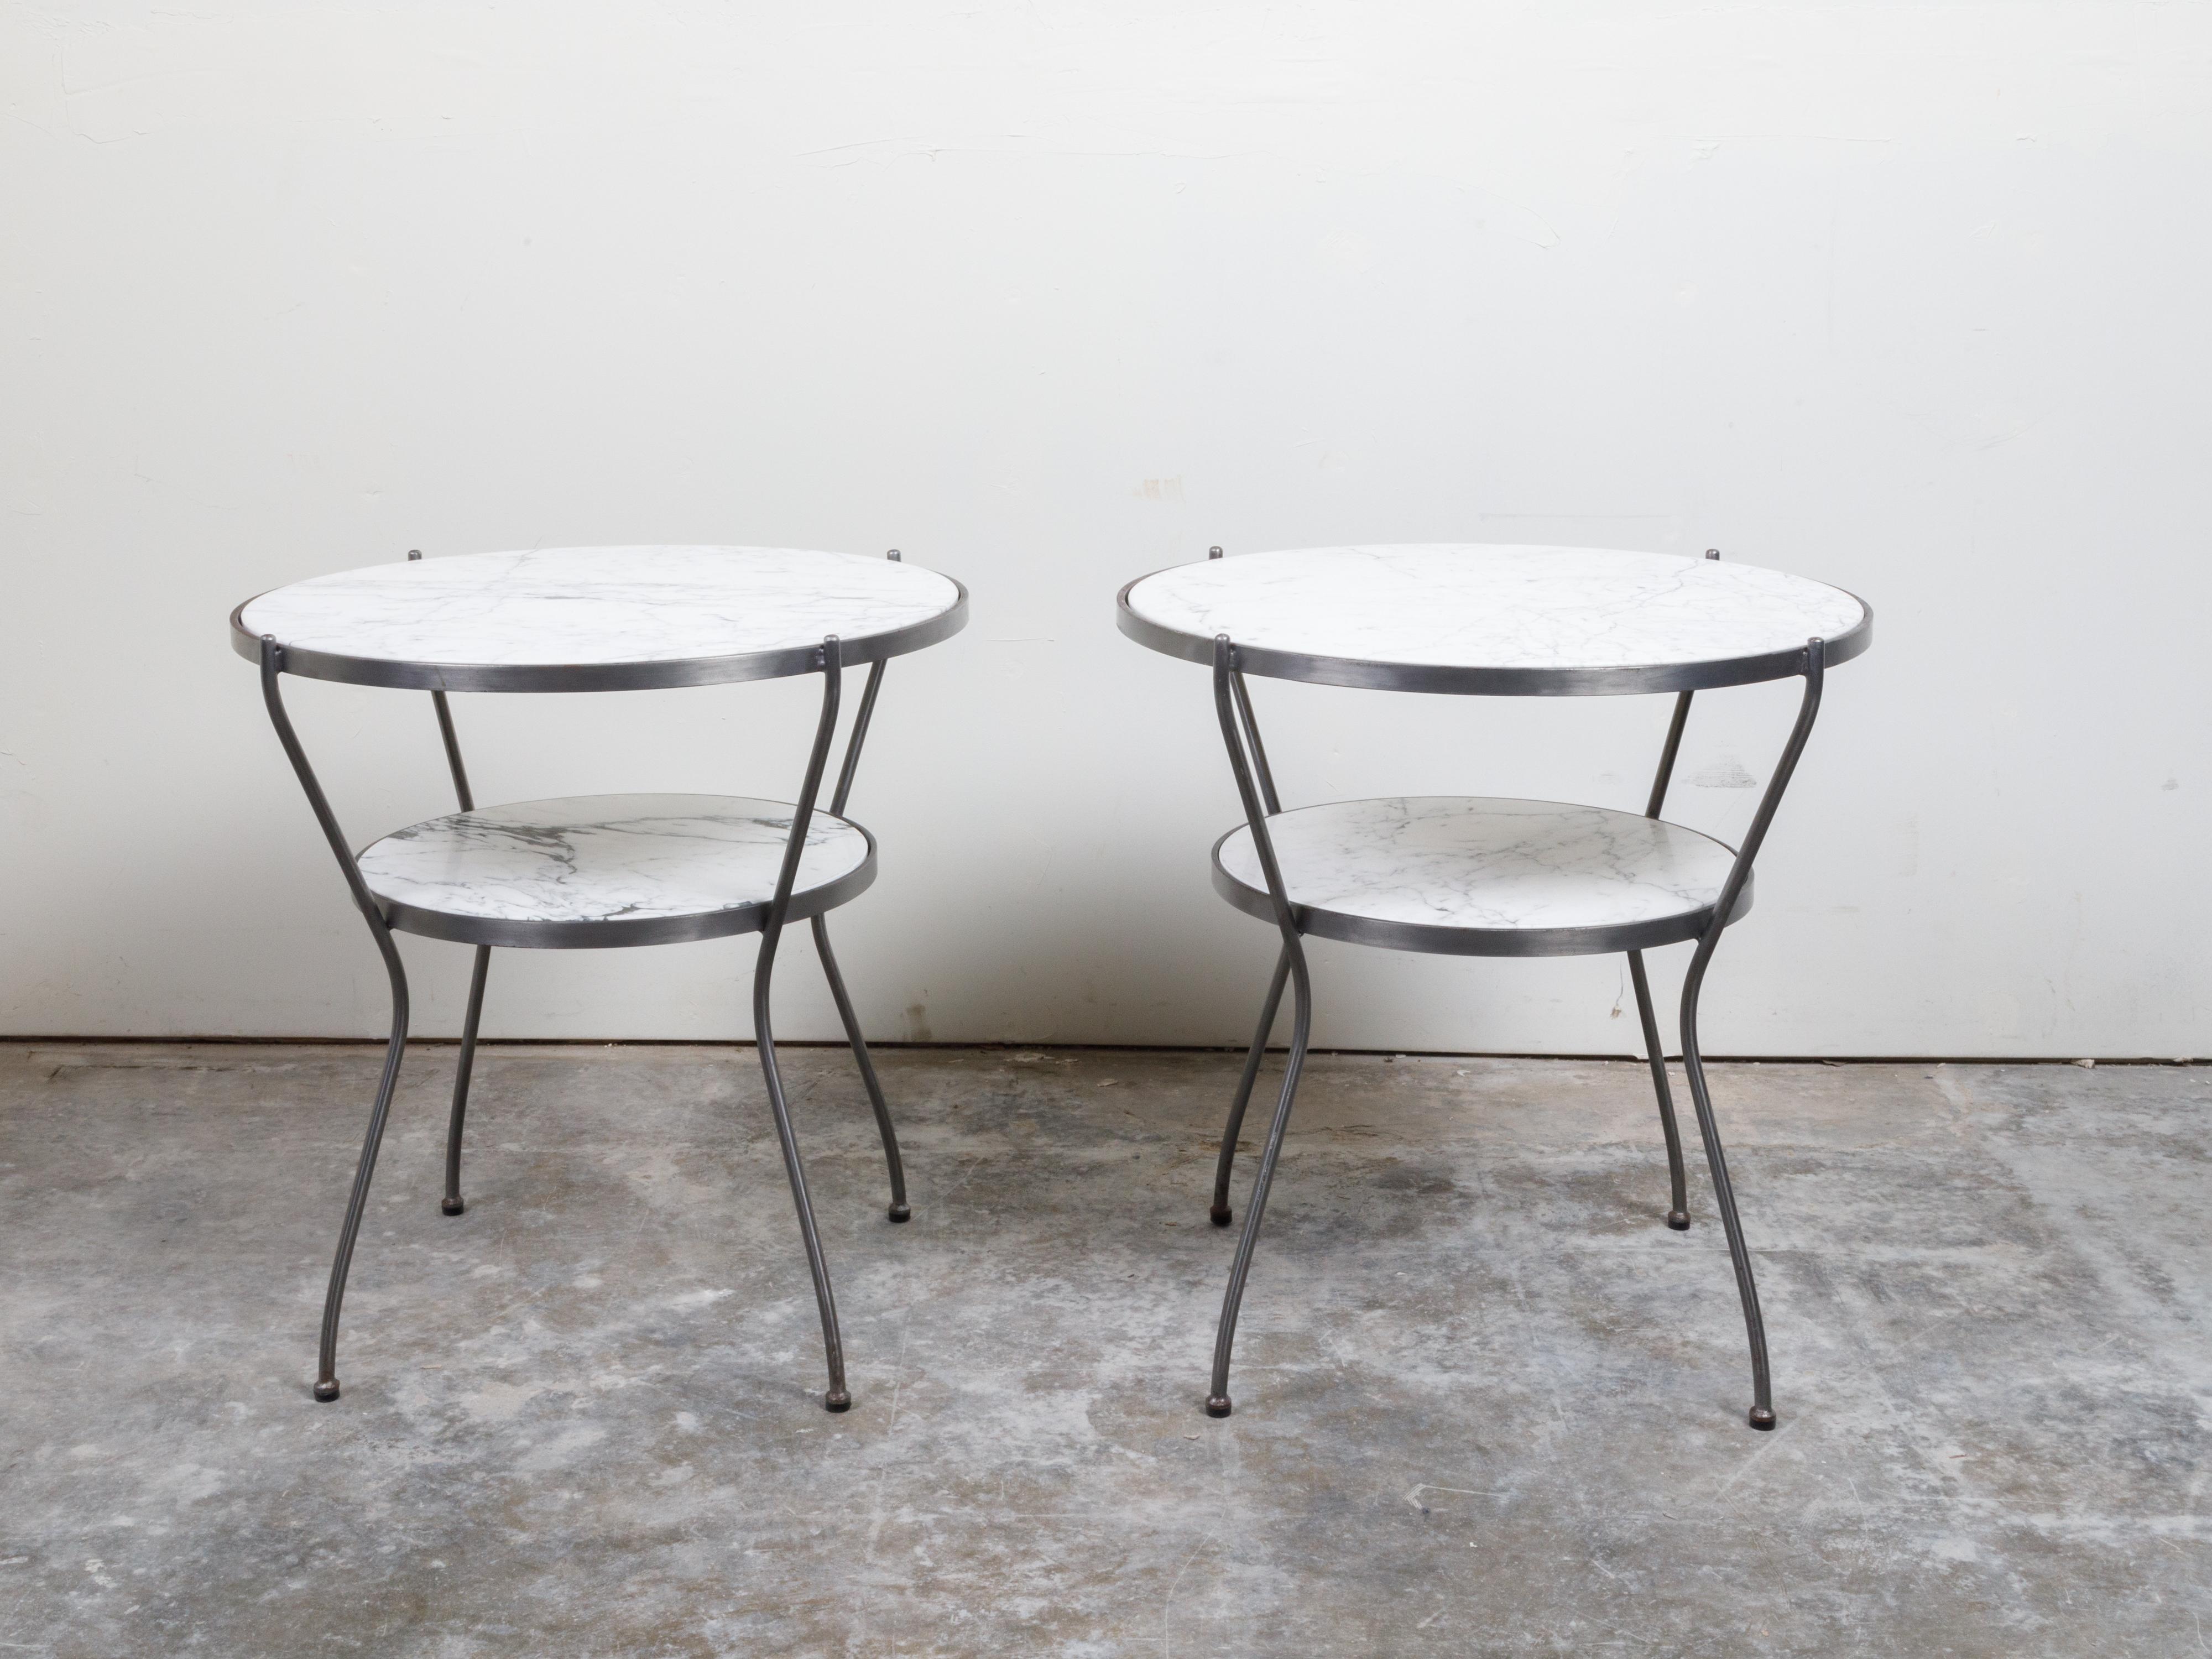 Pair of Italian Midcentury Steel Side Tables with Marble Tops and Shelves For Sale 2